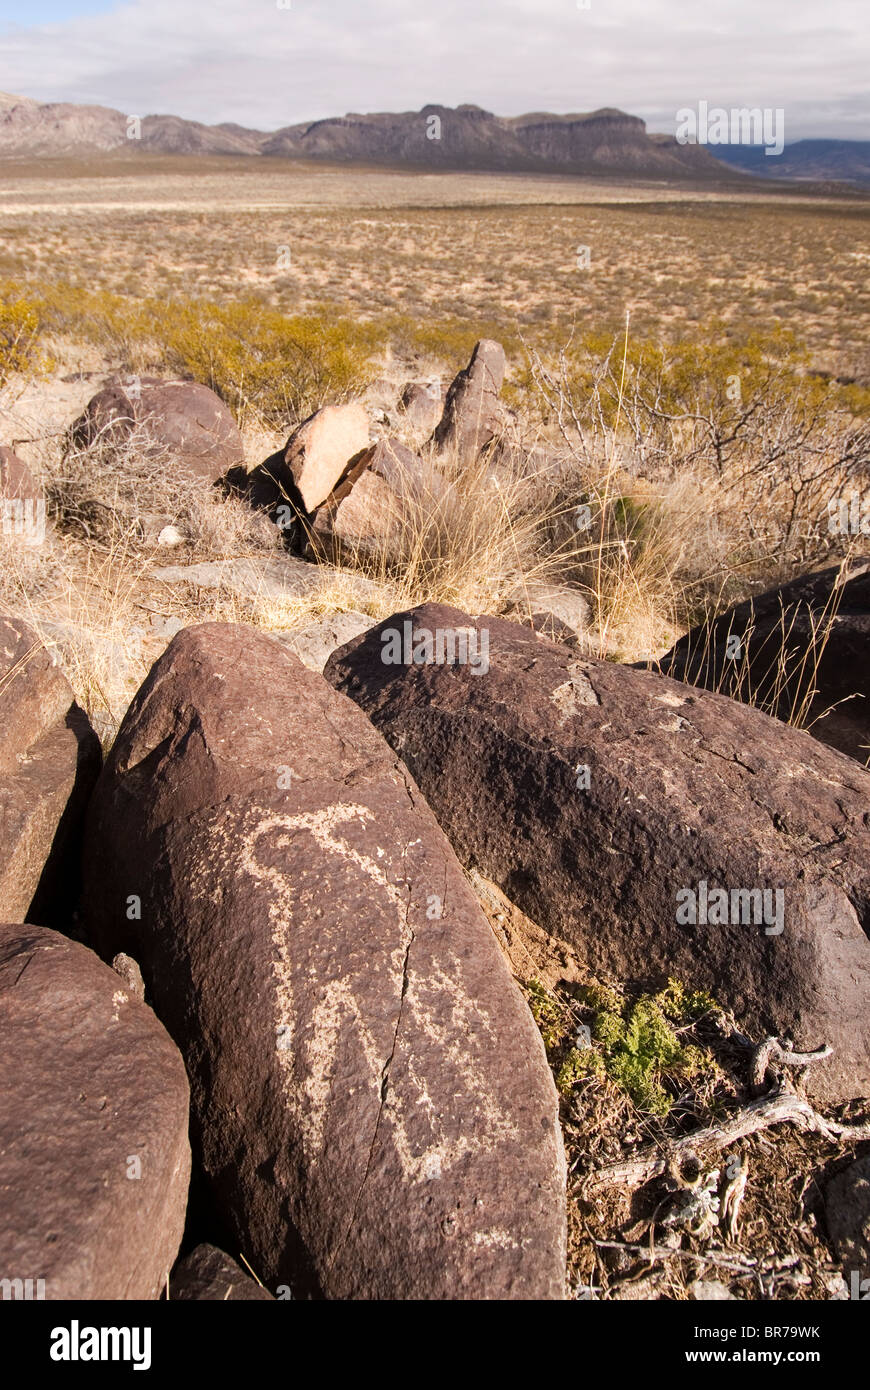 Petroglyphs in the Chihuahuan desert near Three Rivers New Mexico. Stock Photo